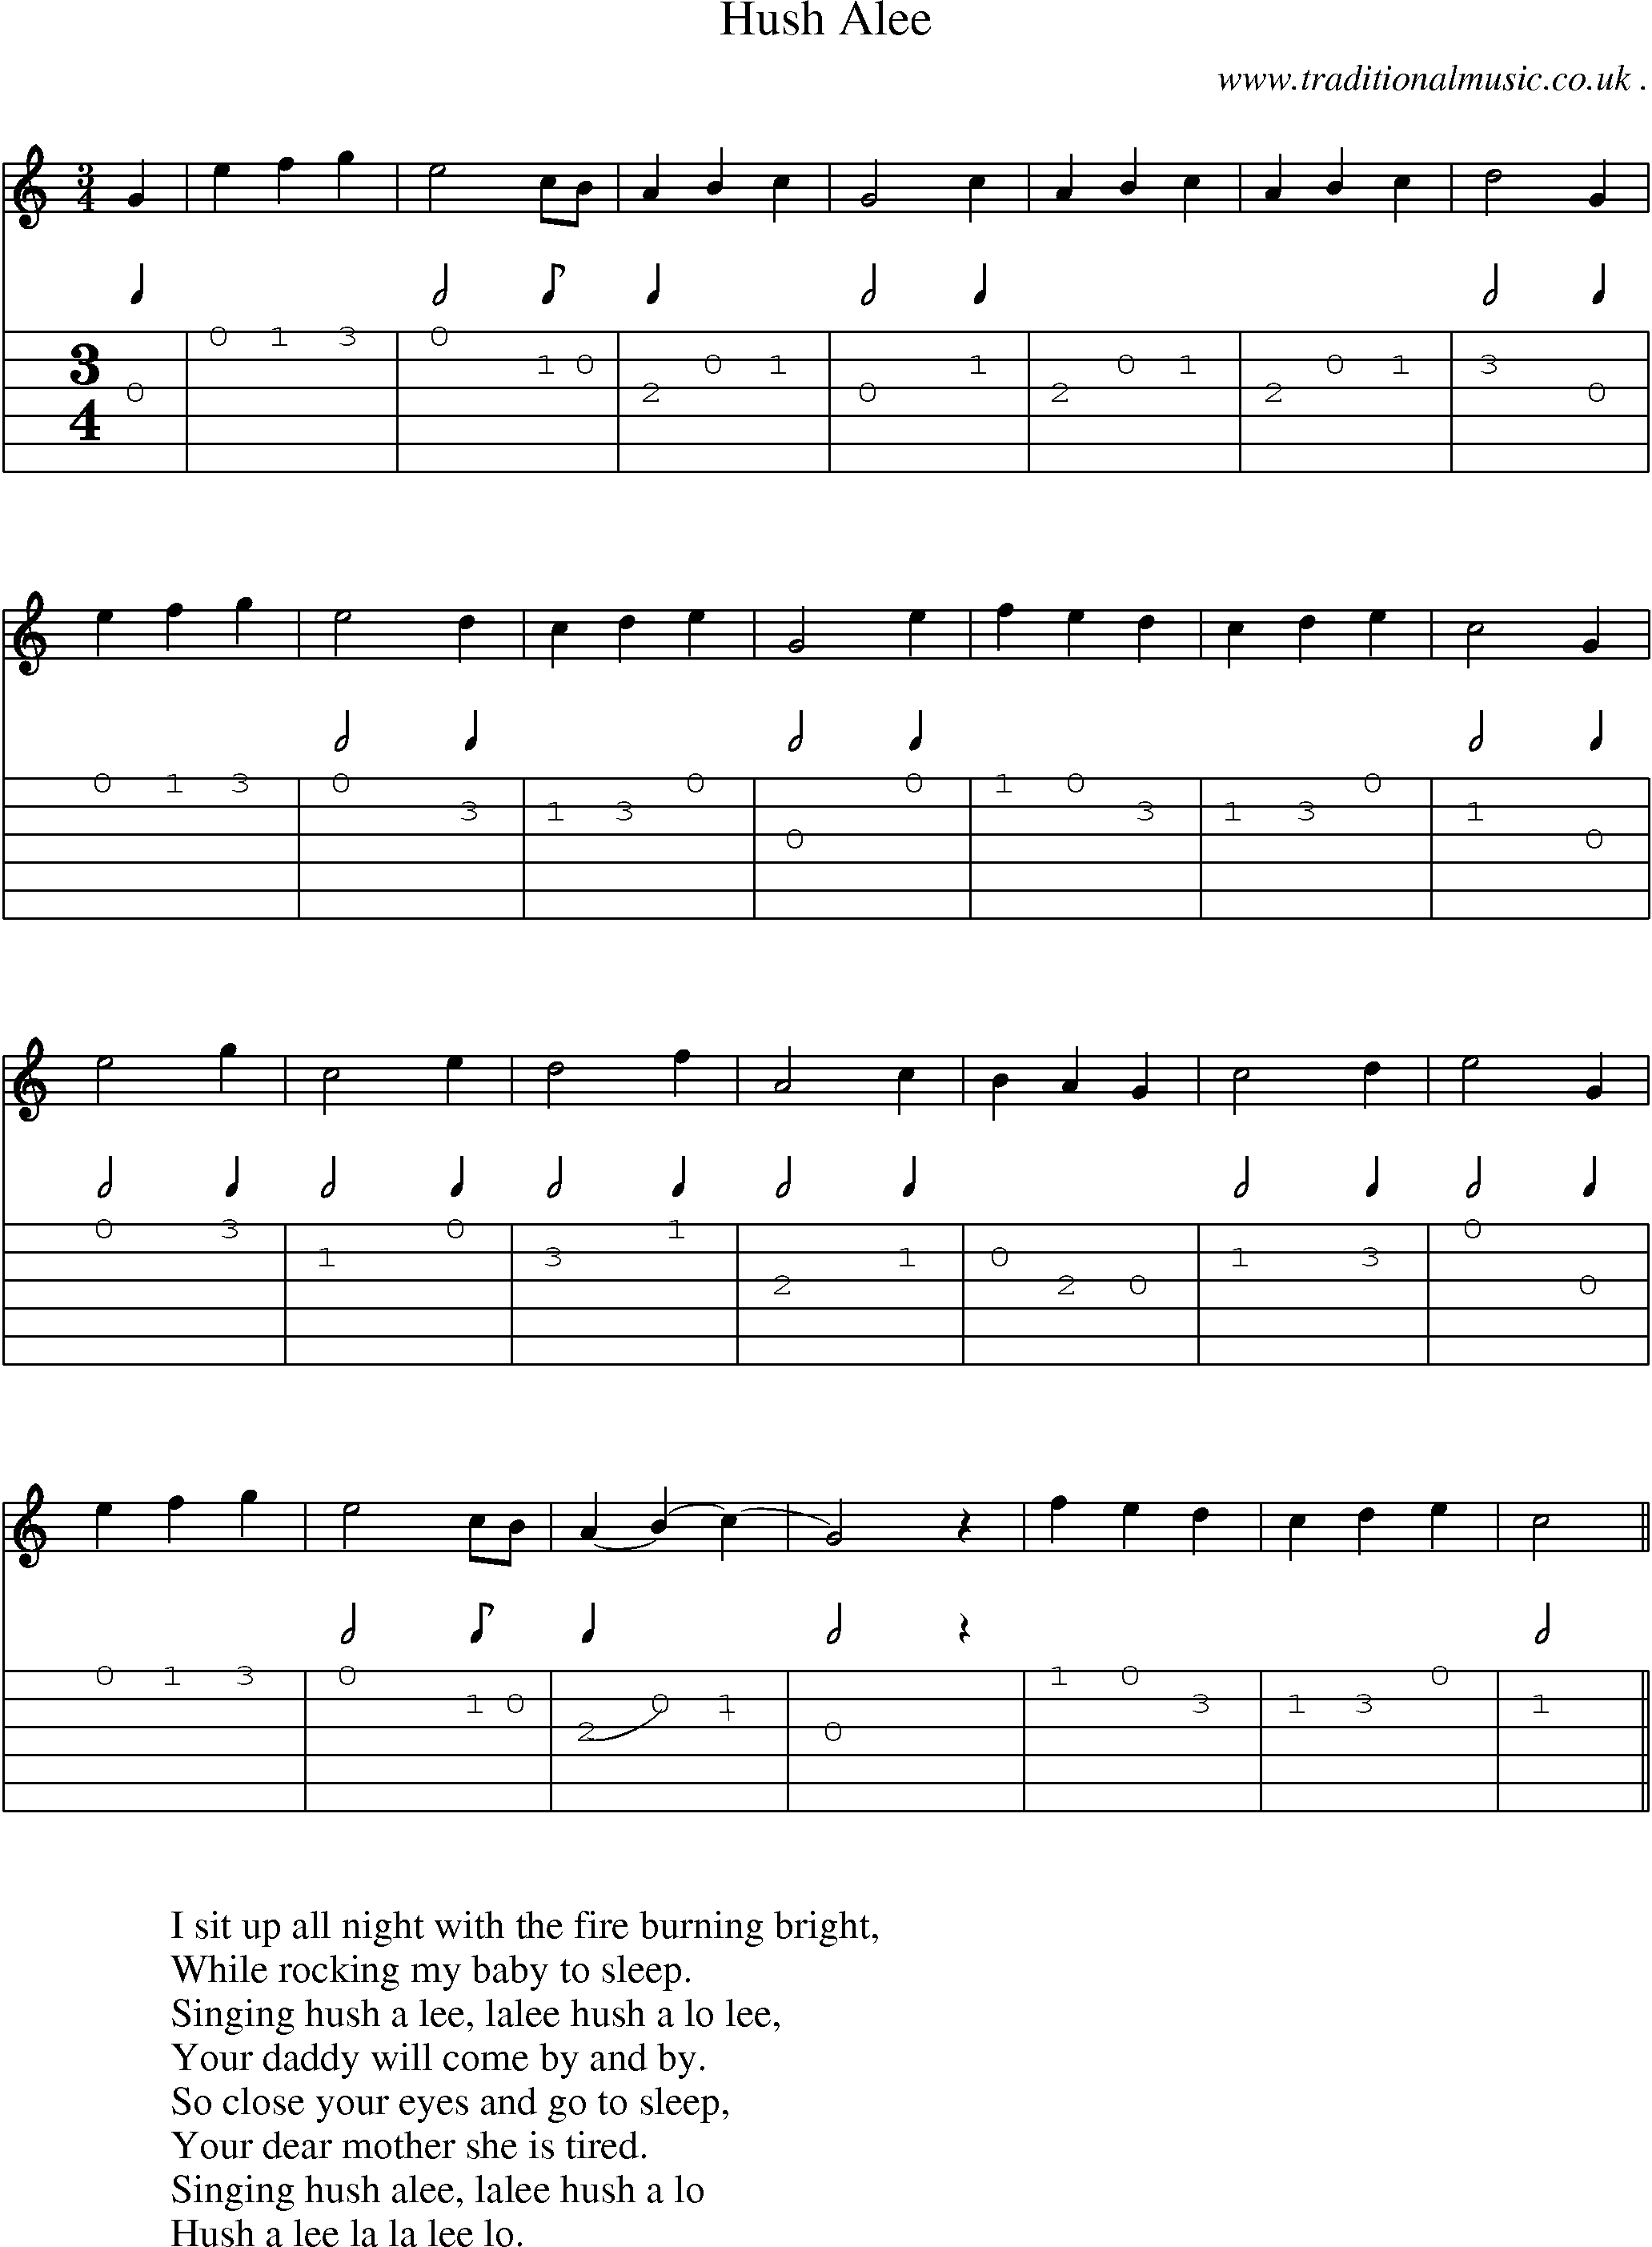 Sheet-Music and Guitar Tabs for Hush Alee